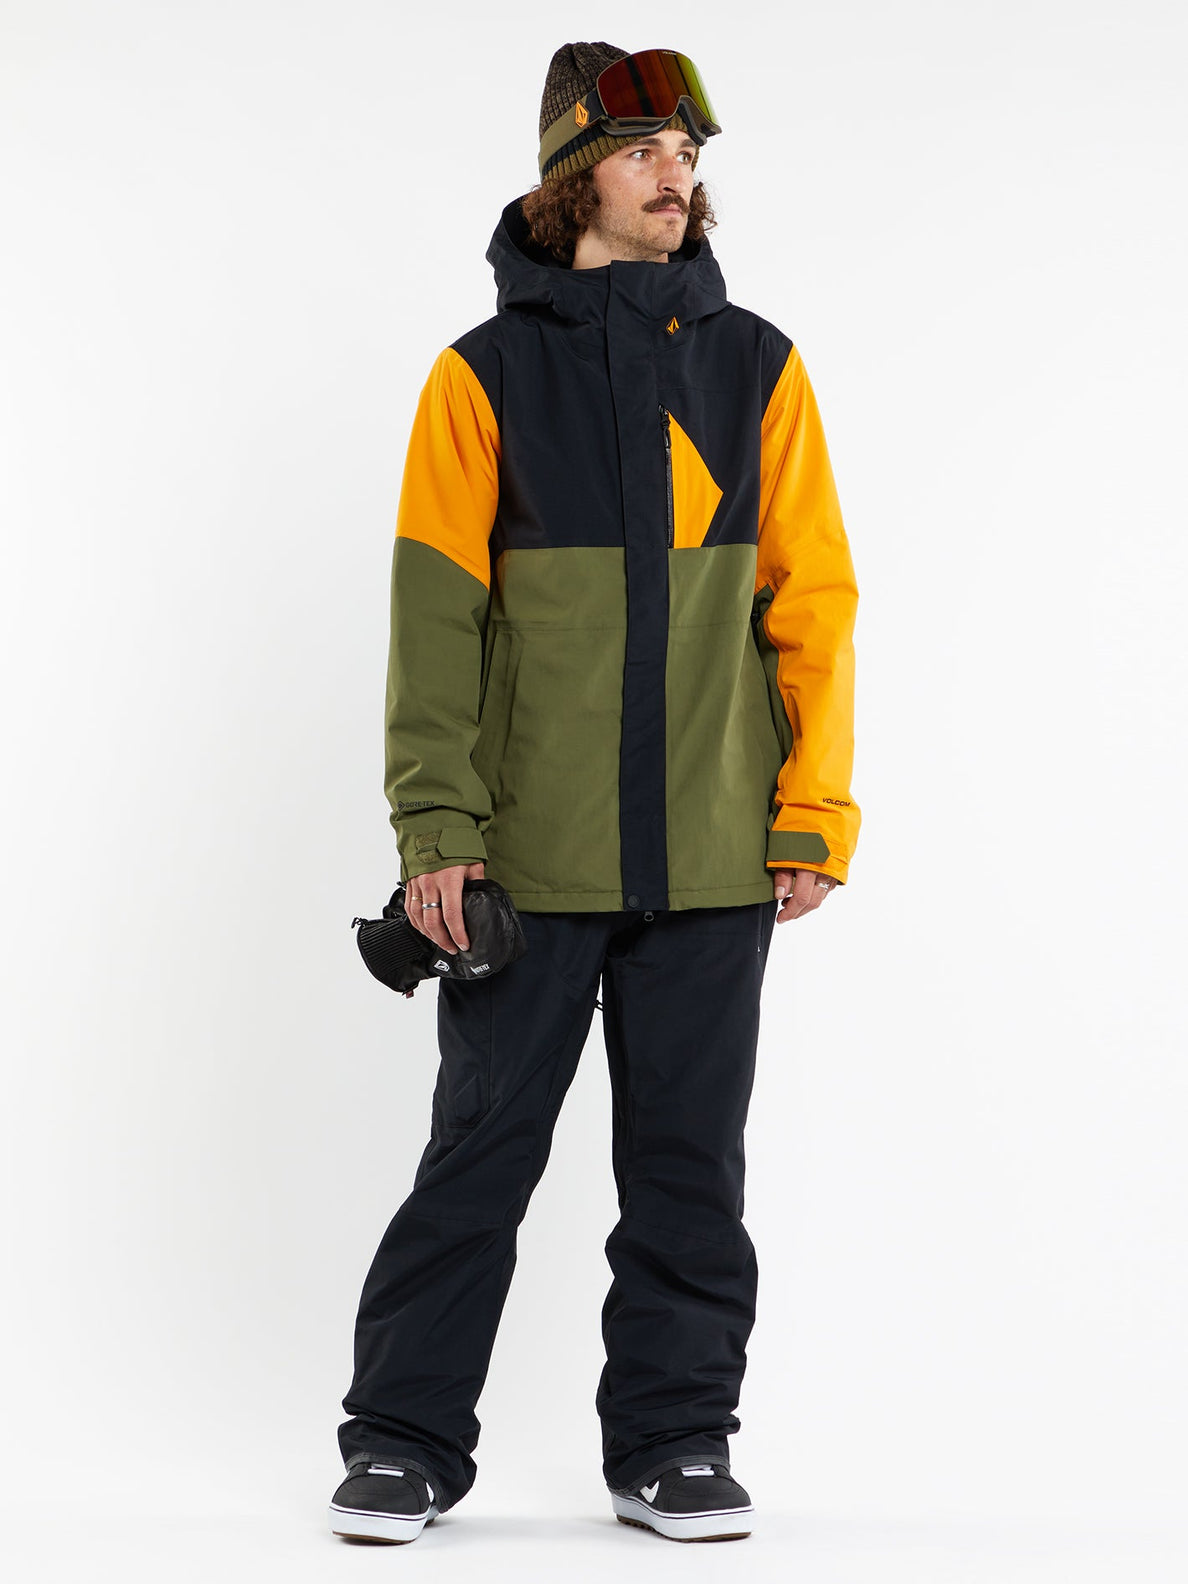 L Insulated Gore-Tex Jacket - GOLD (G0452403_GLD) [44]